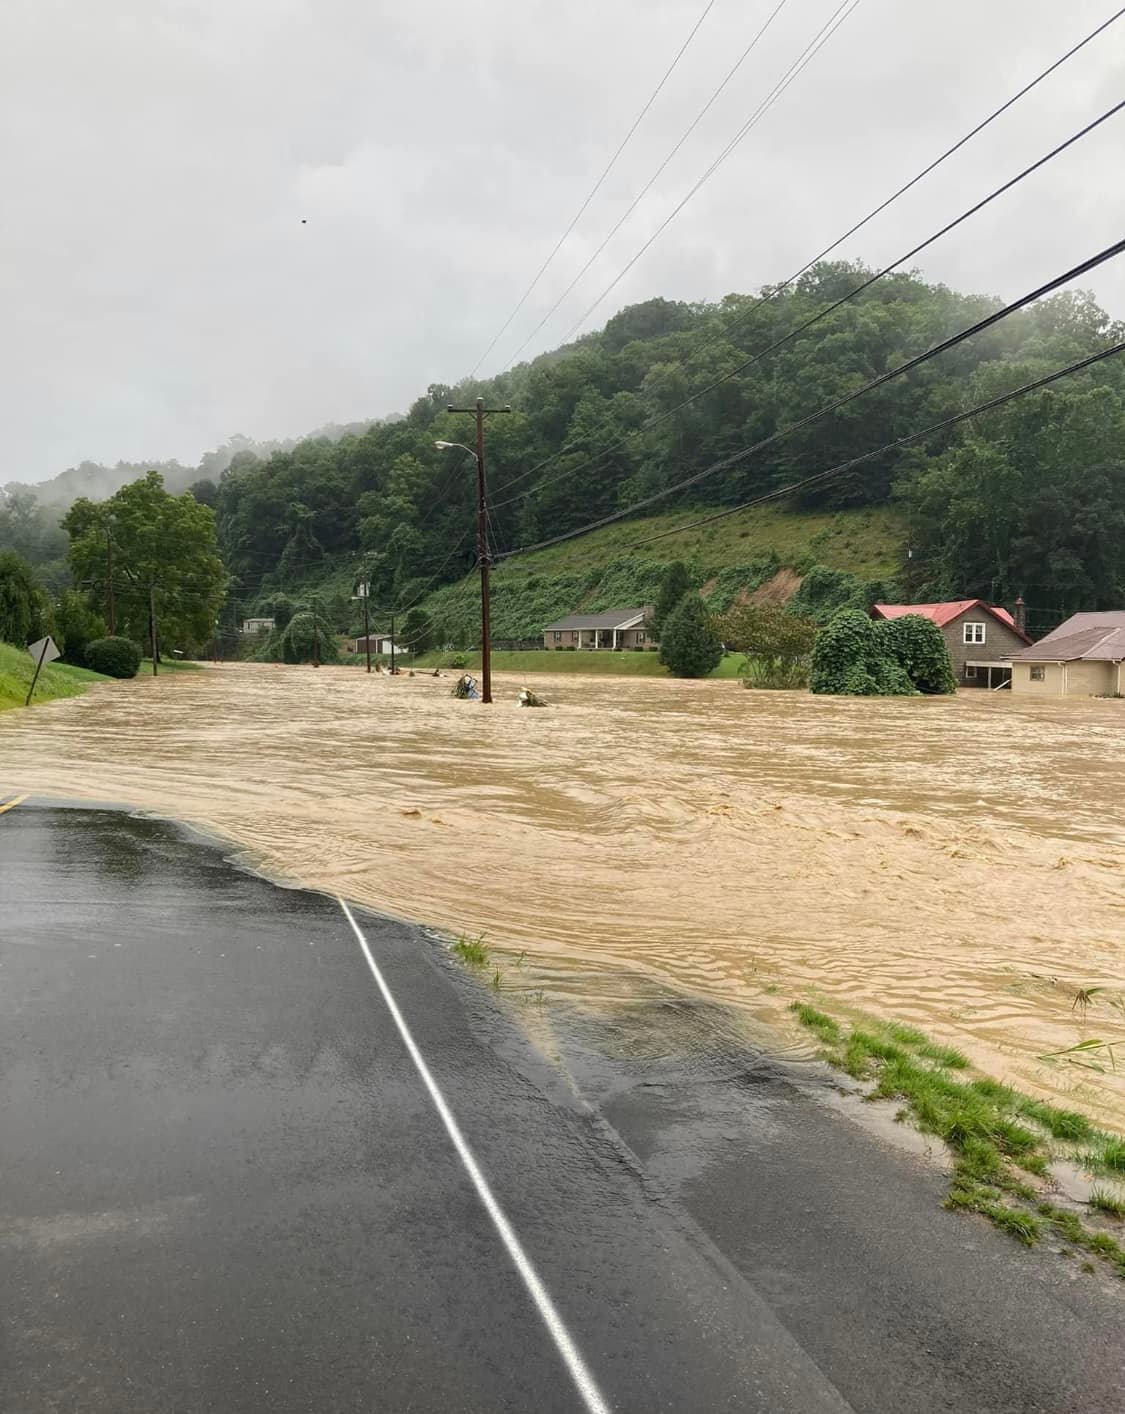 Flood waters over roads and surrounding houses in Hindman, KY